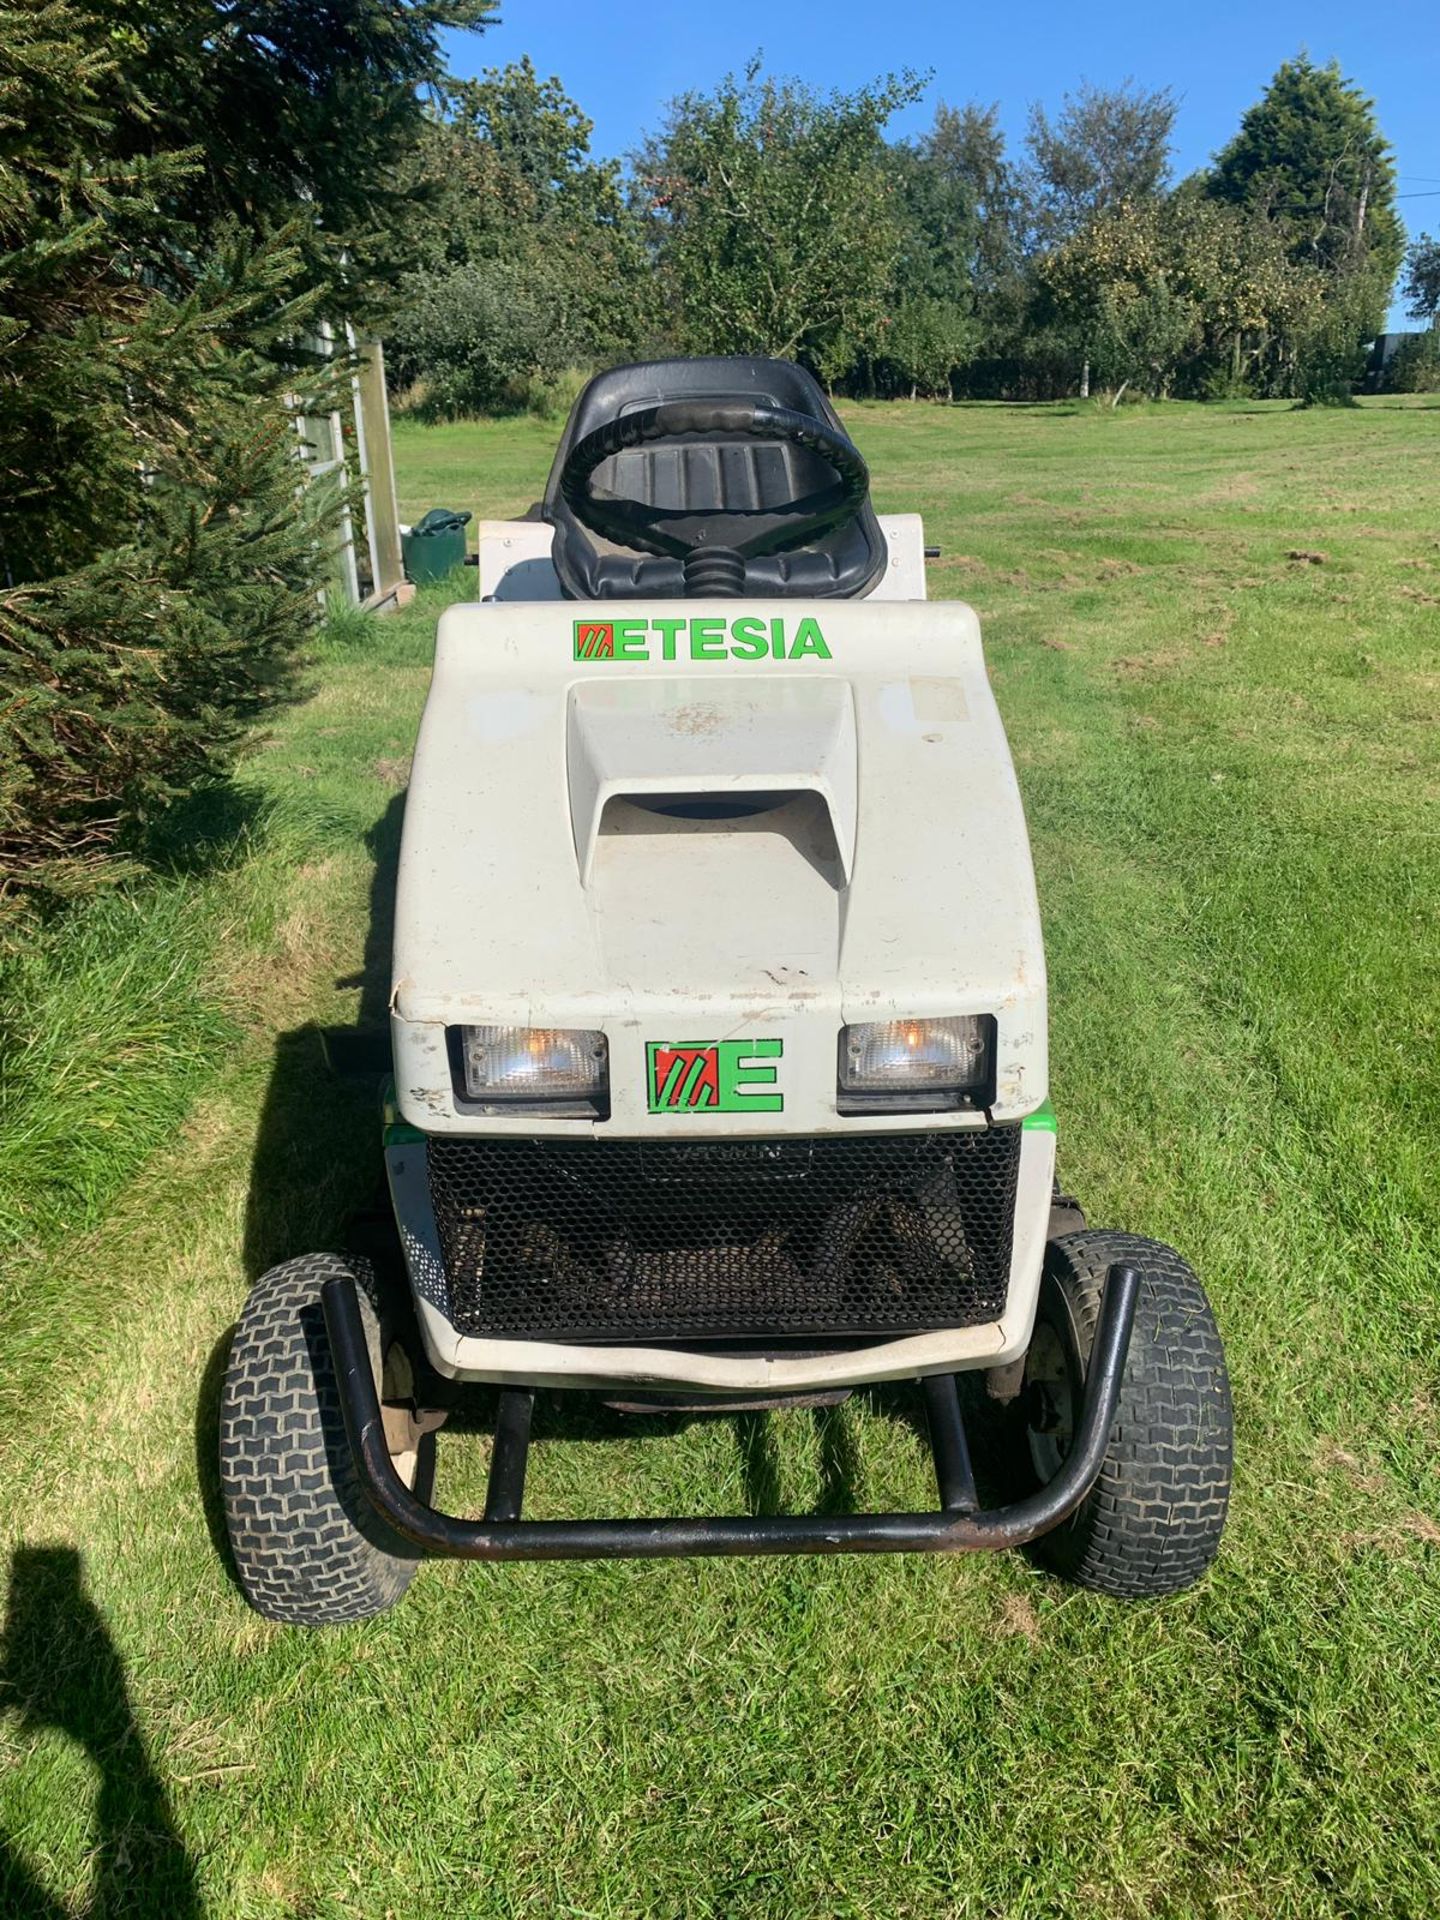 ETESIA MVEHH HYDRO RIDE ON LAWN MOWER C/W REAR GRASS COLLECTOR, RUNS, WORKS AND CUTS *PLUS VAT* - Image 3 of 16